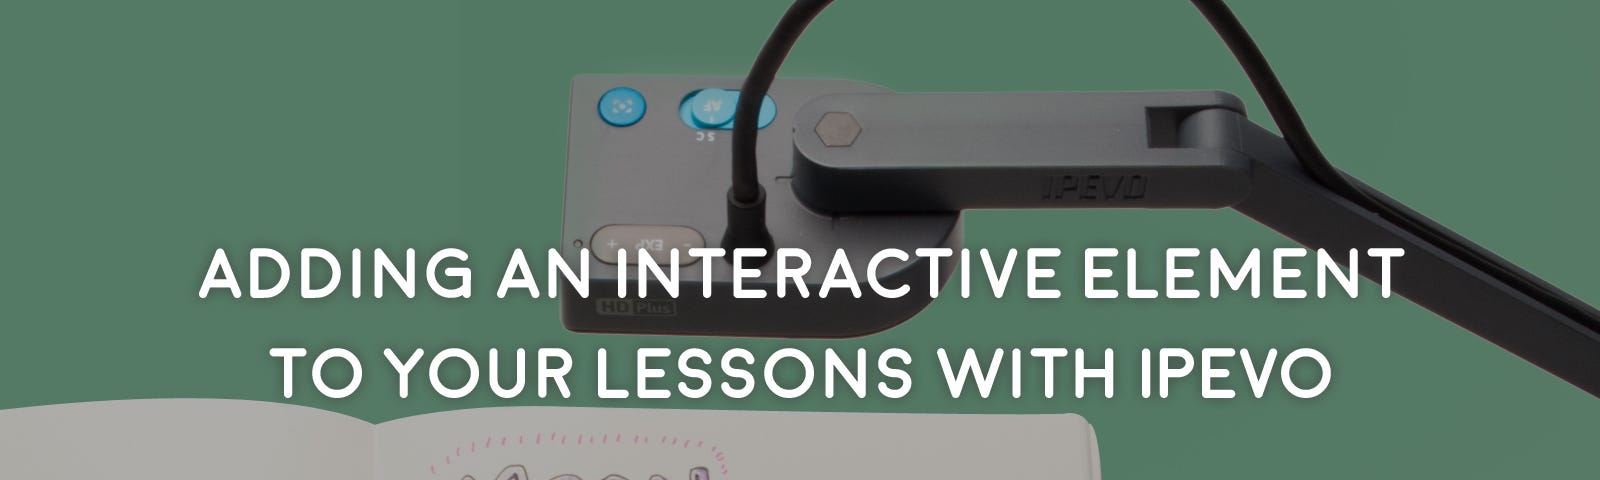 Adding an Interactive Element to Your Lessons with IPEVO